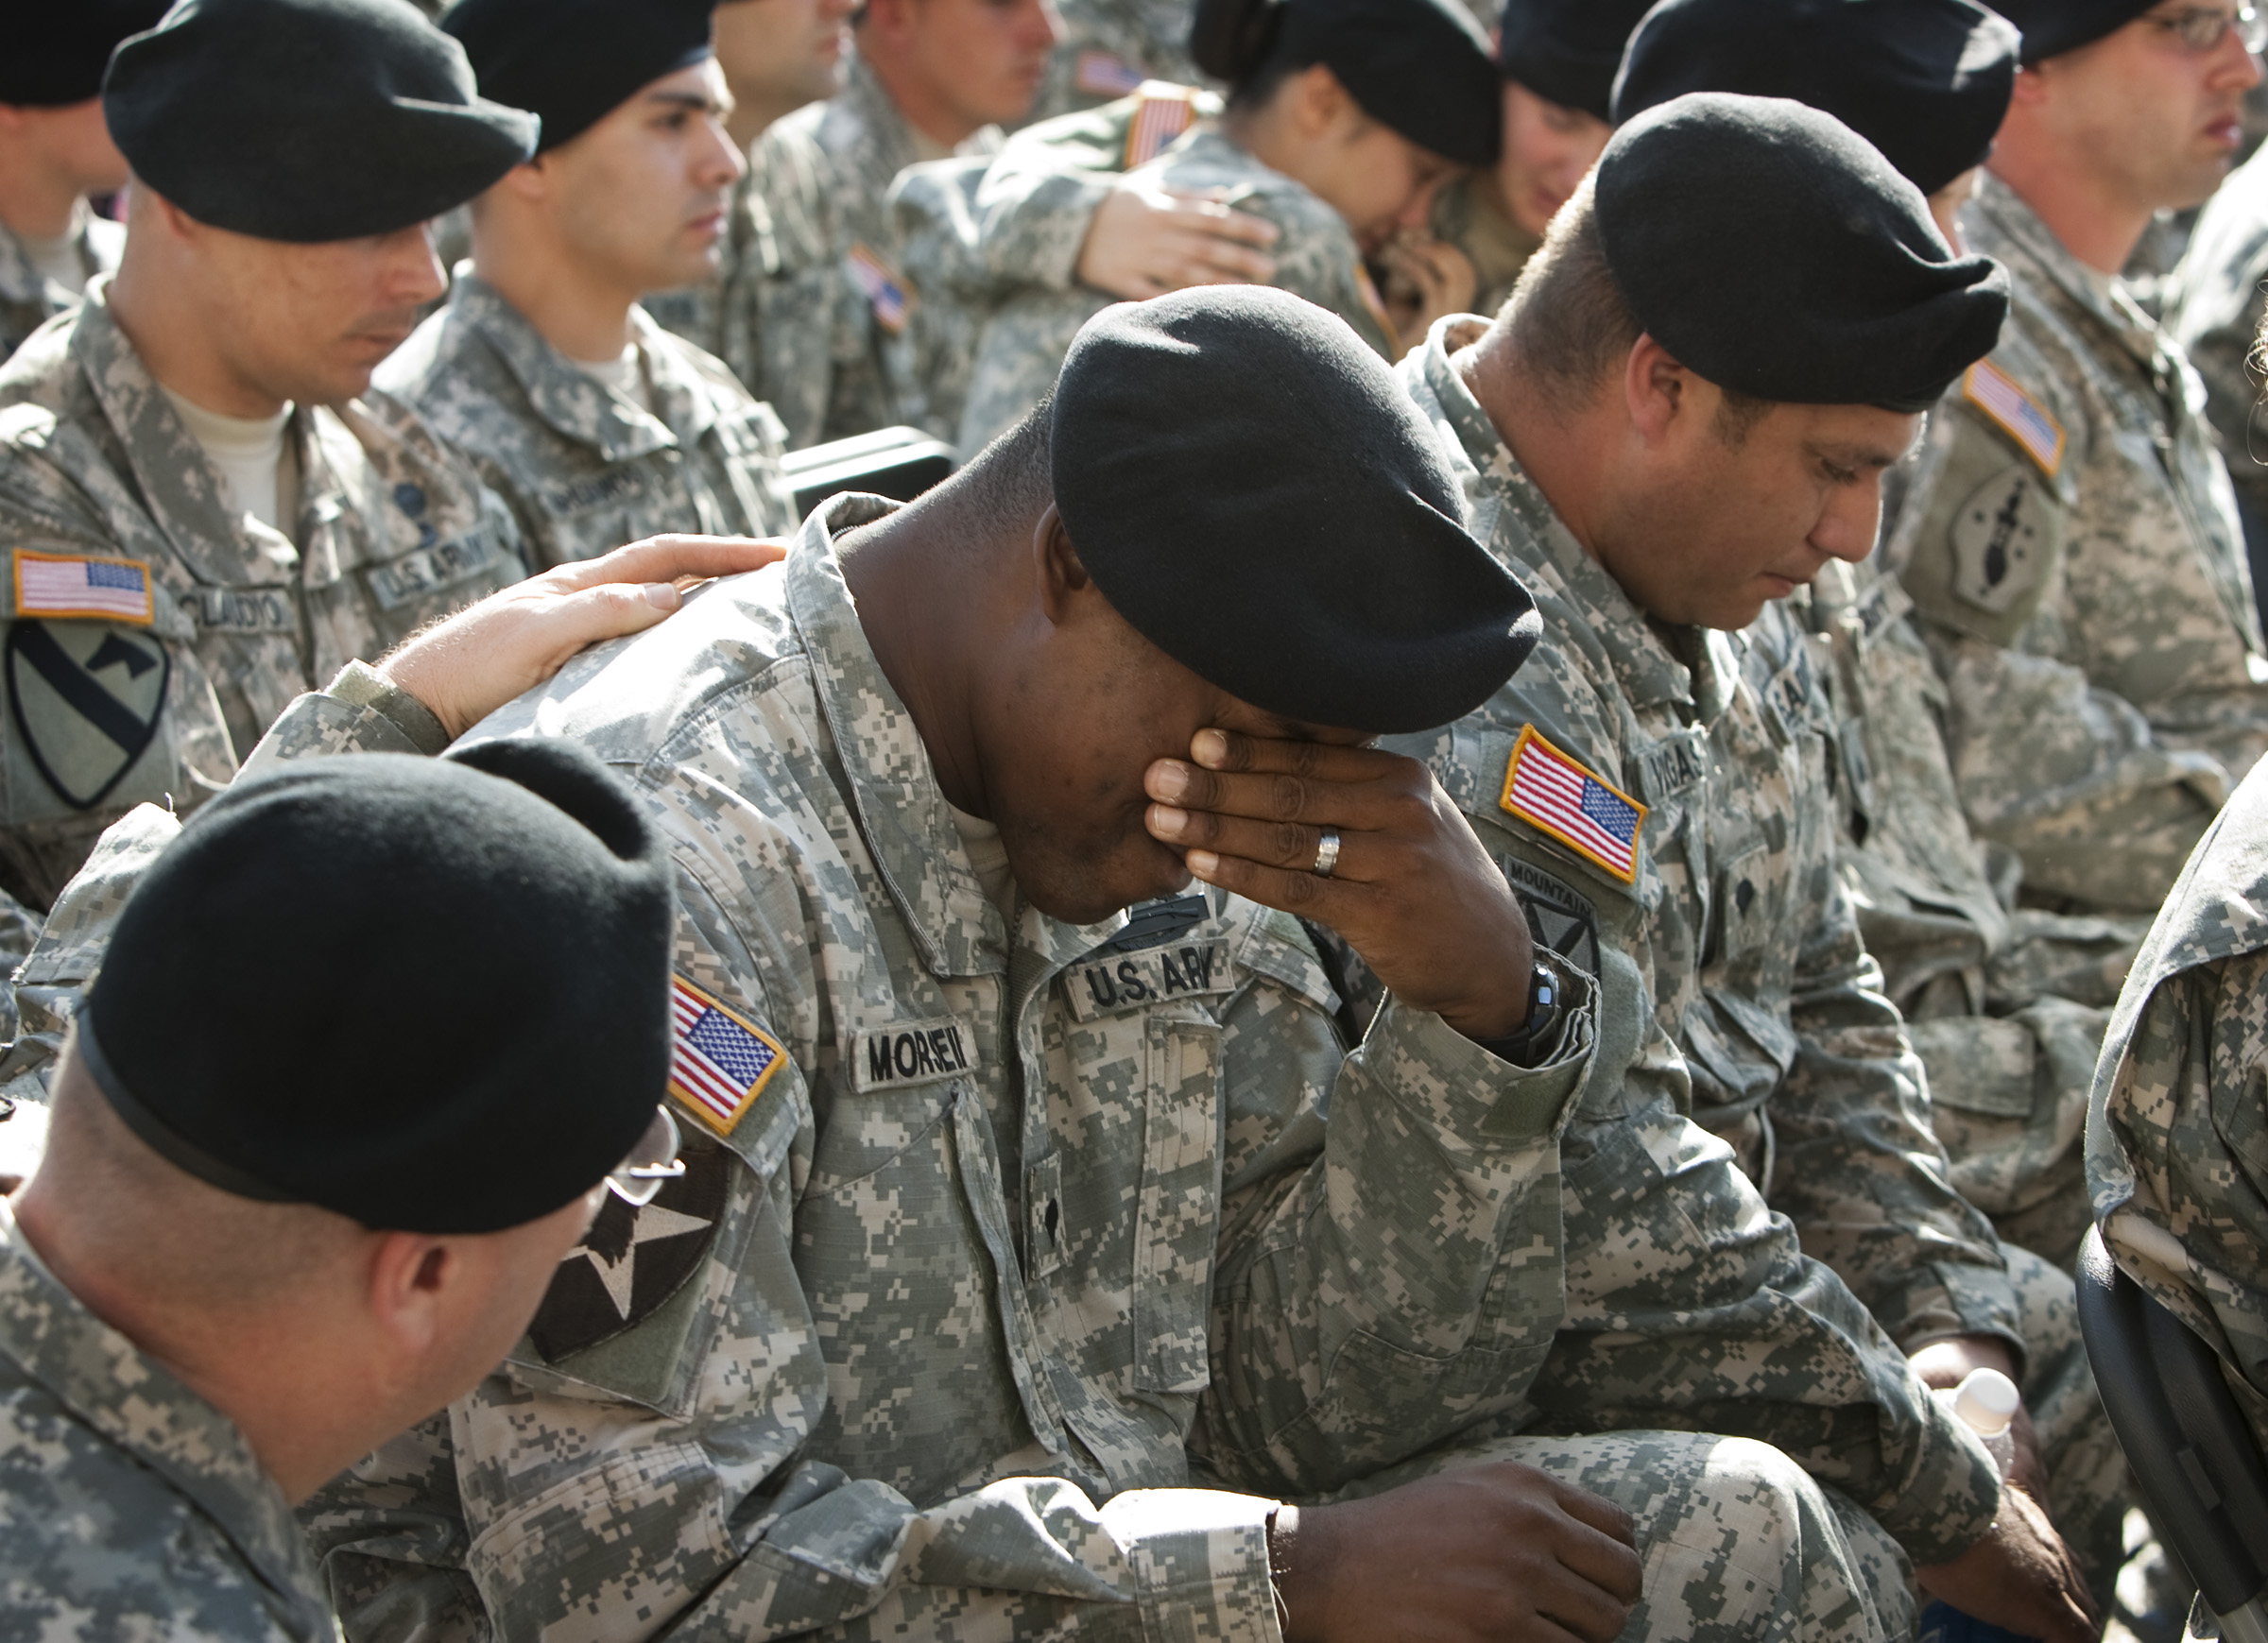 A soldier cries at a memorial service at Fort Hood, Texas